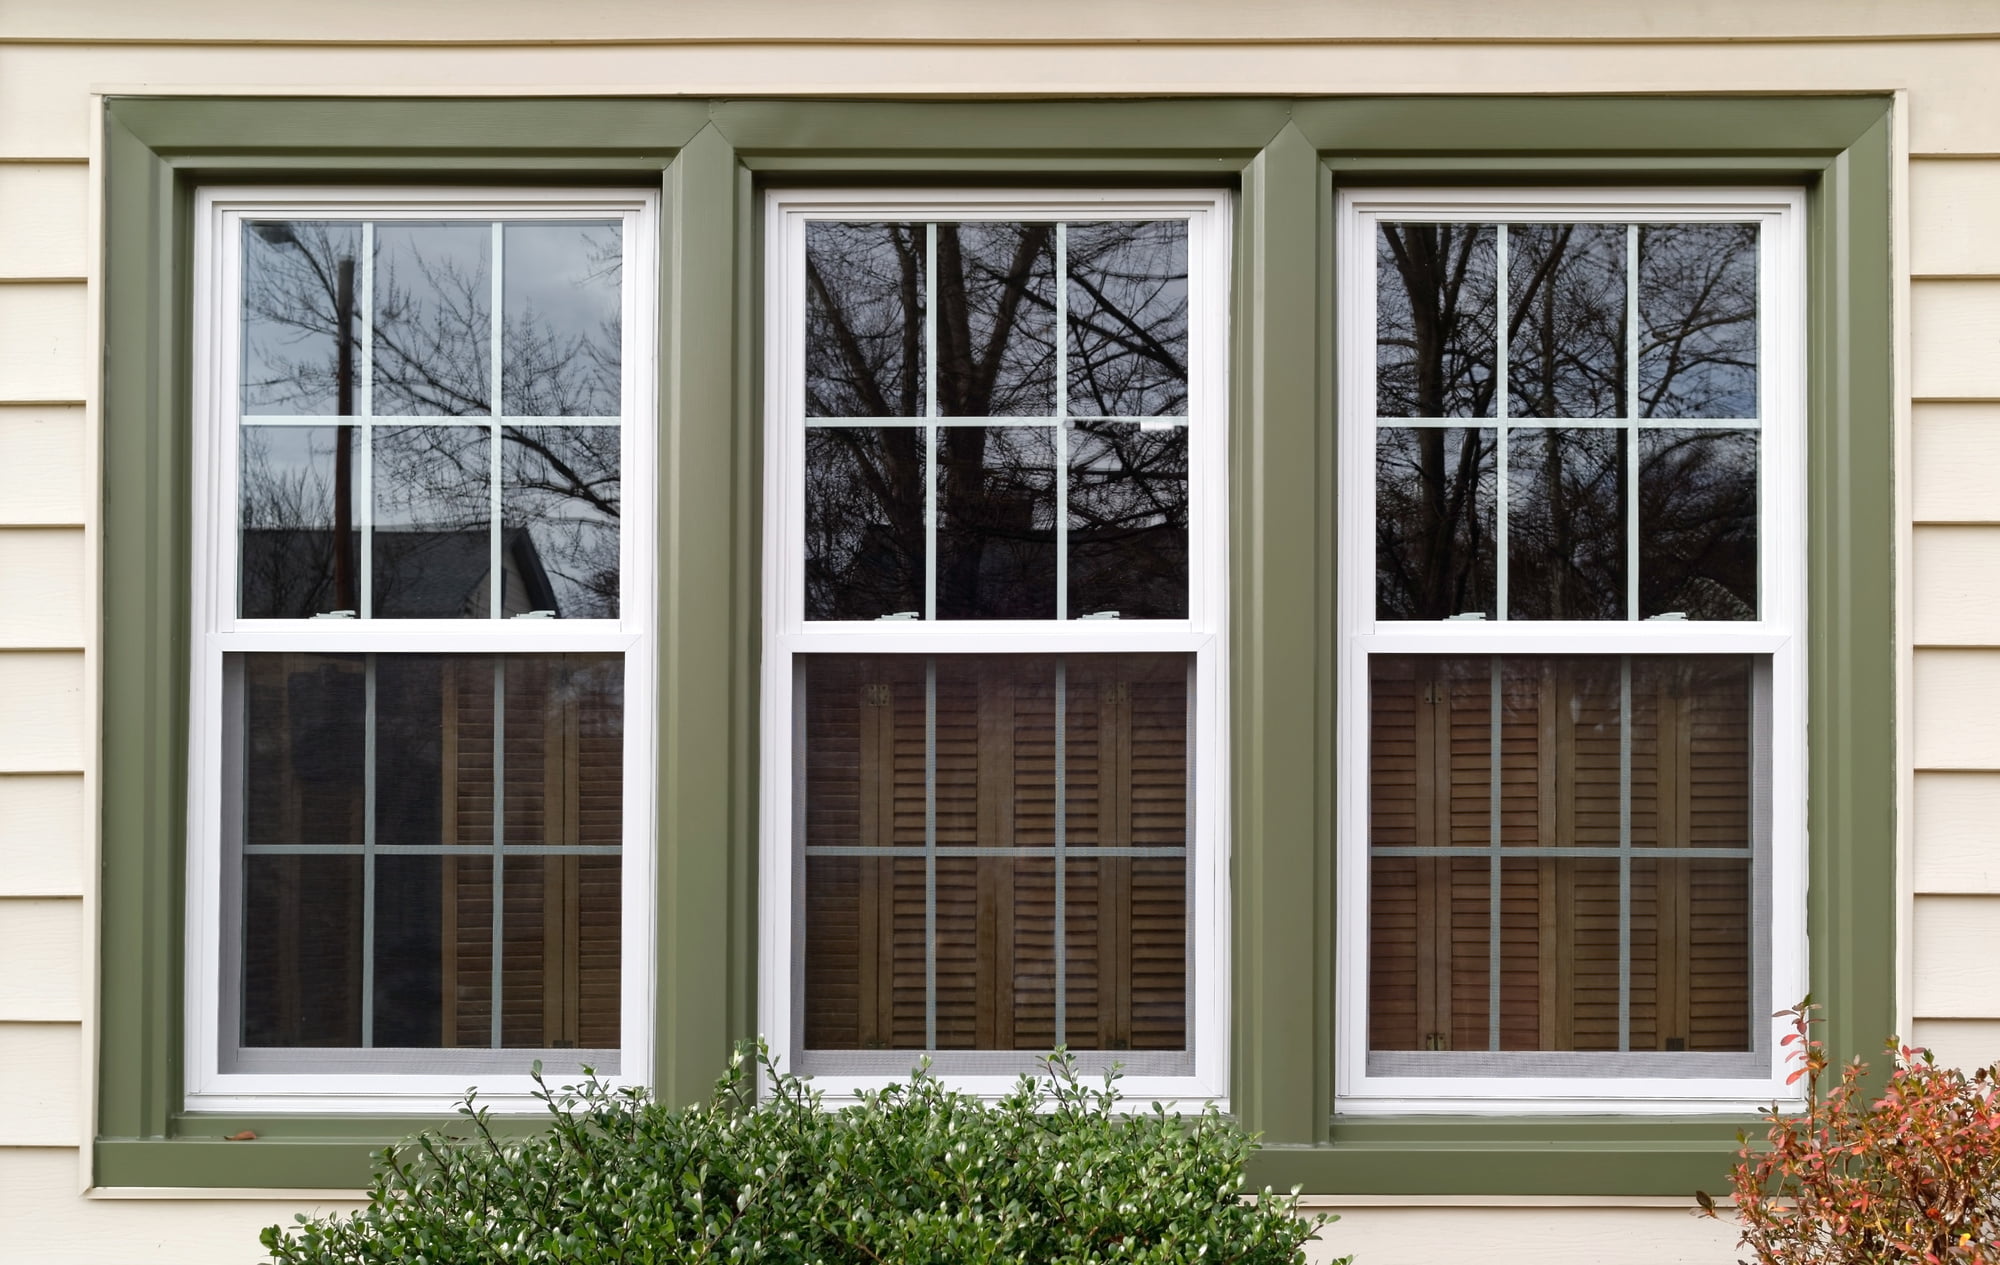 Window tinting for homes in Florida is a great investment that conserves energy and much more. Find out how to choose the right film for your windows now.